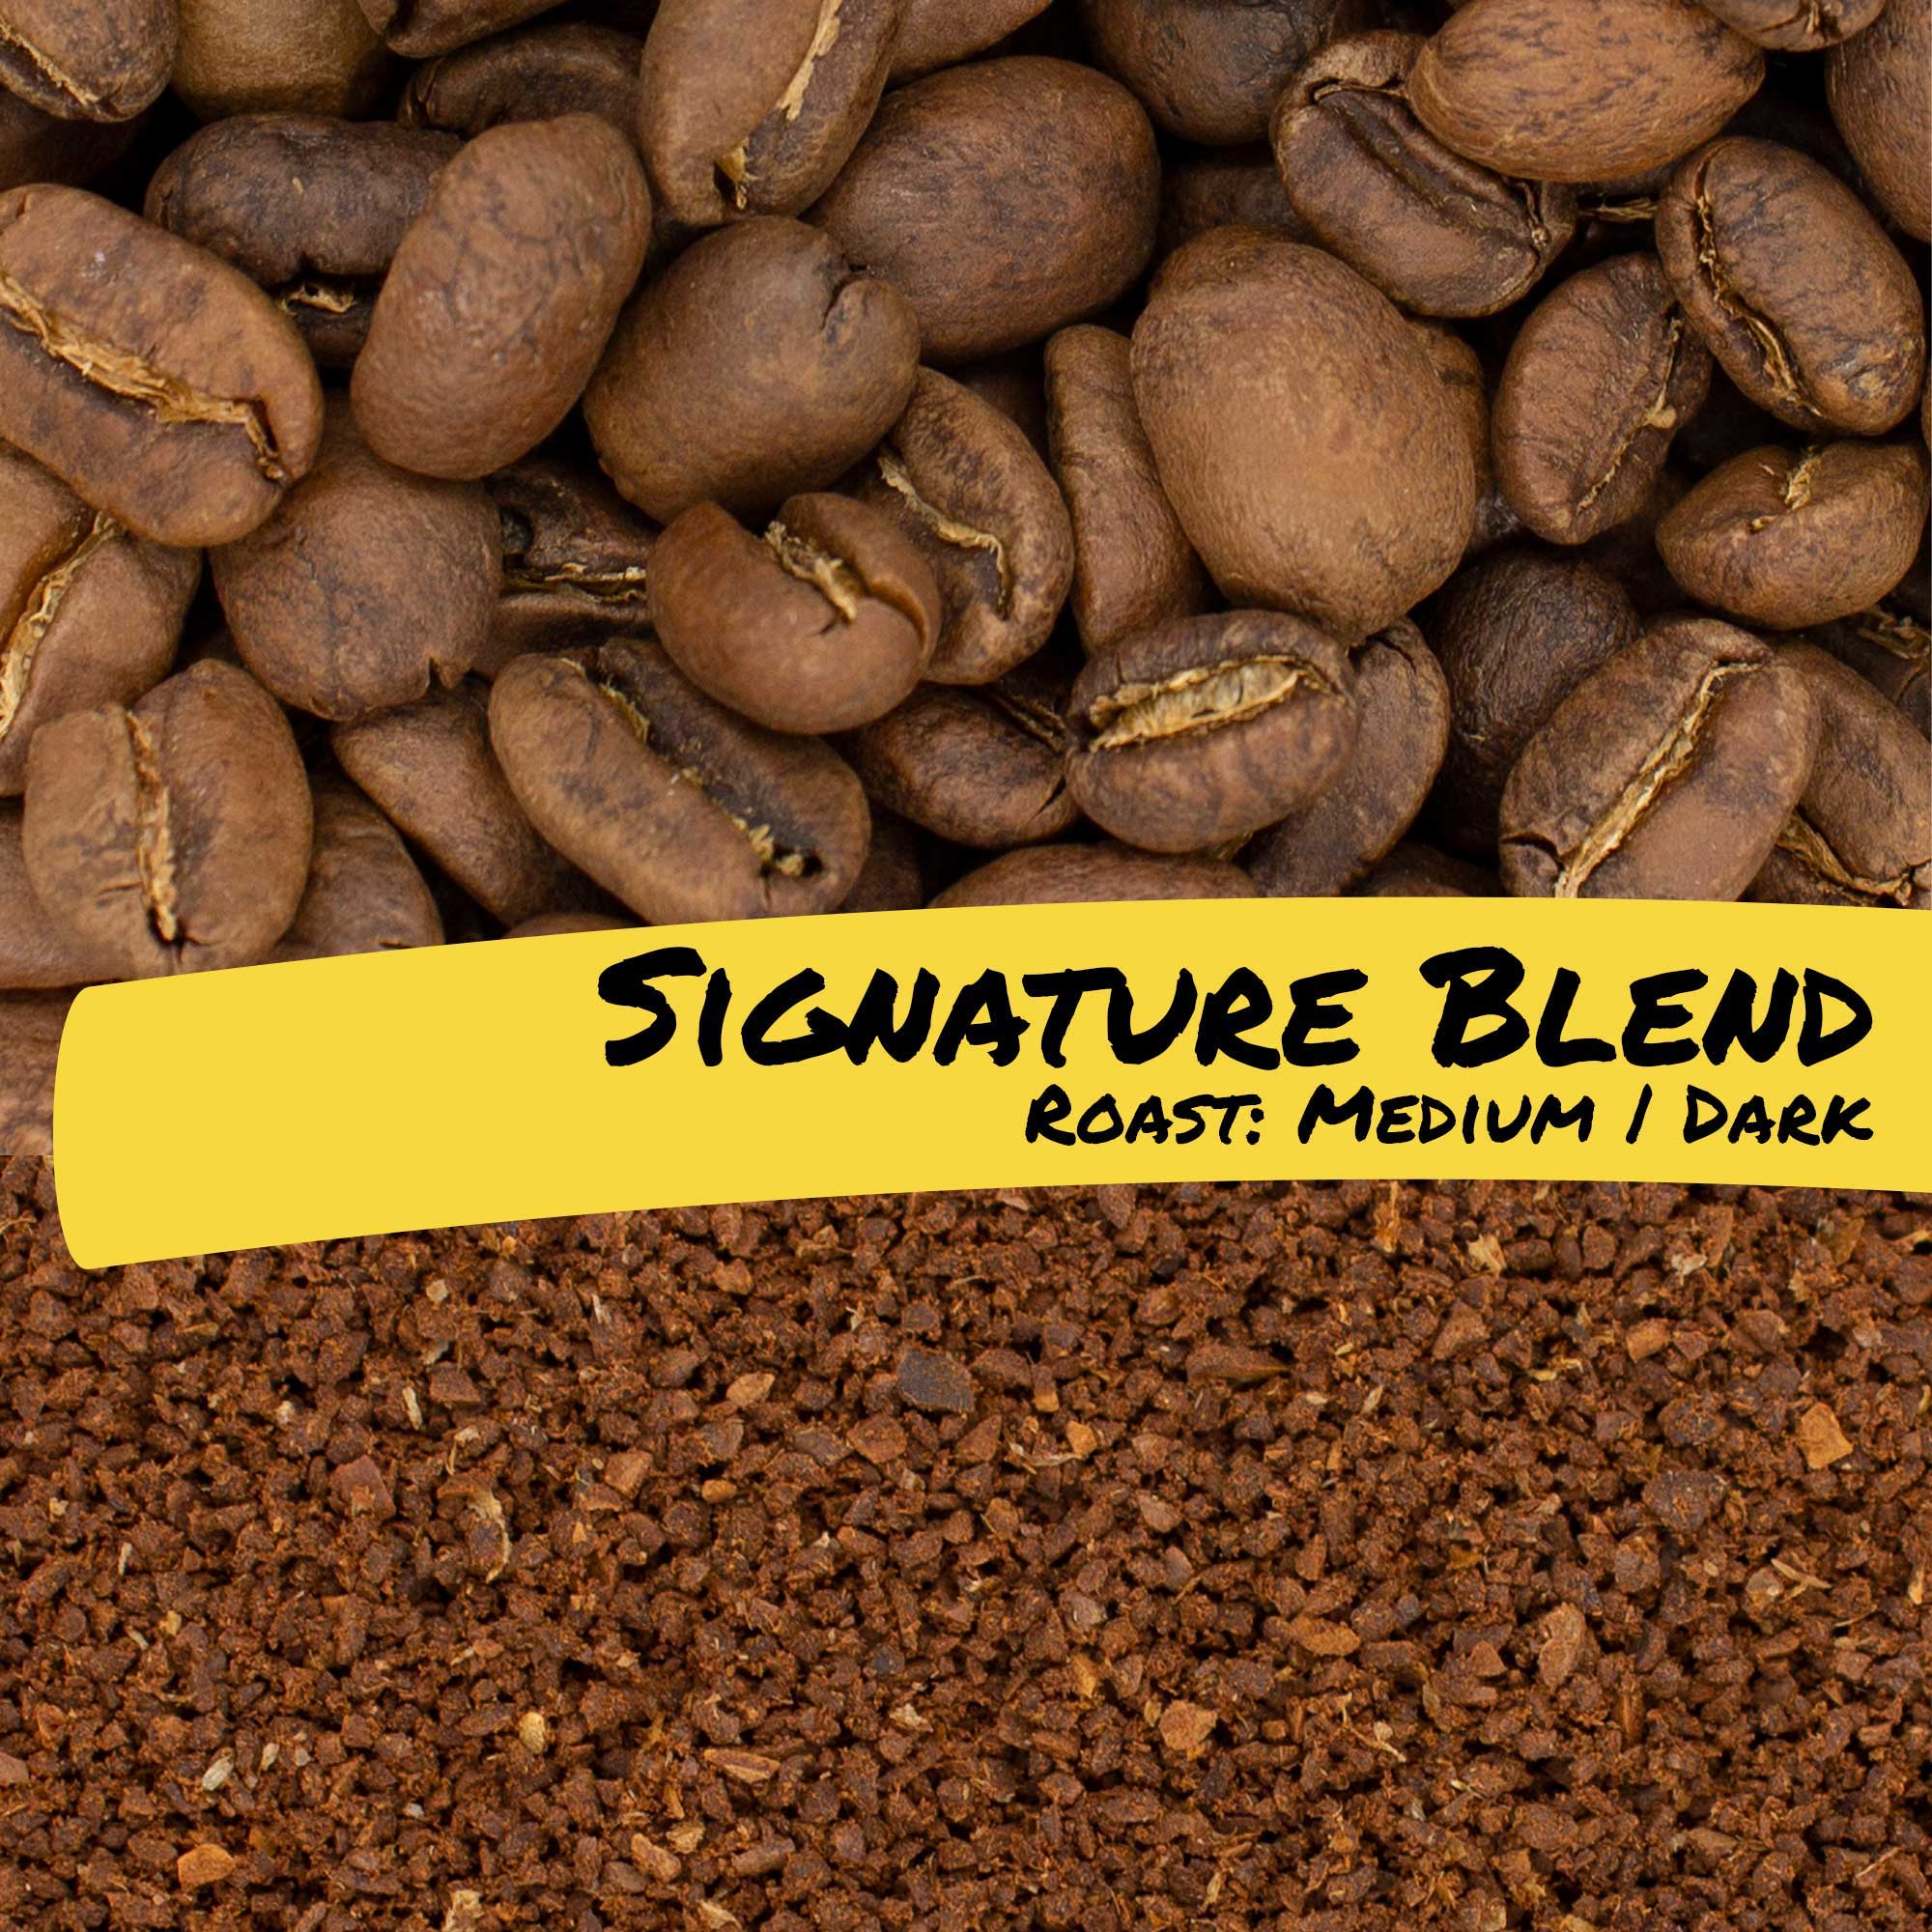 RAVE Signature Blend | Coffee Beans 1kg or 250g – RAVE COFFEE